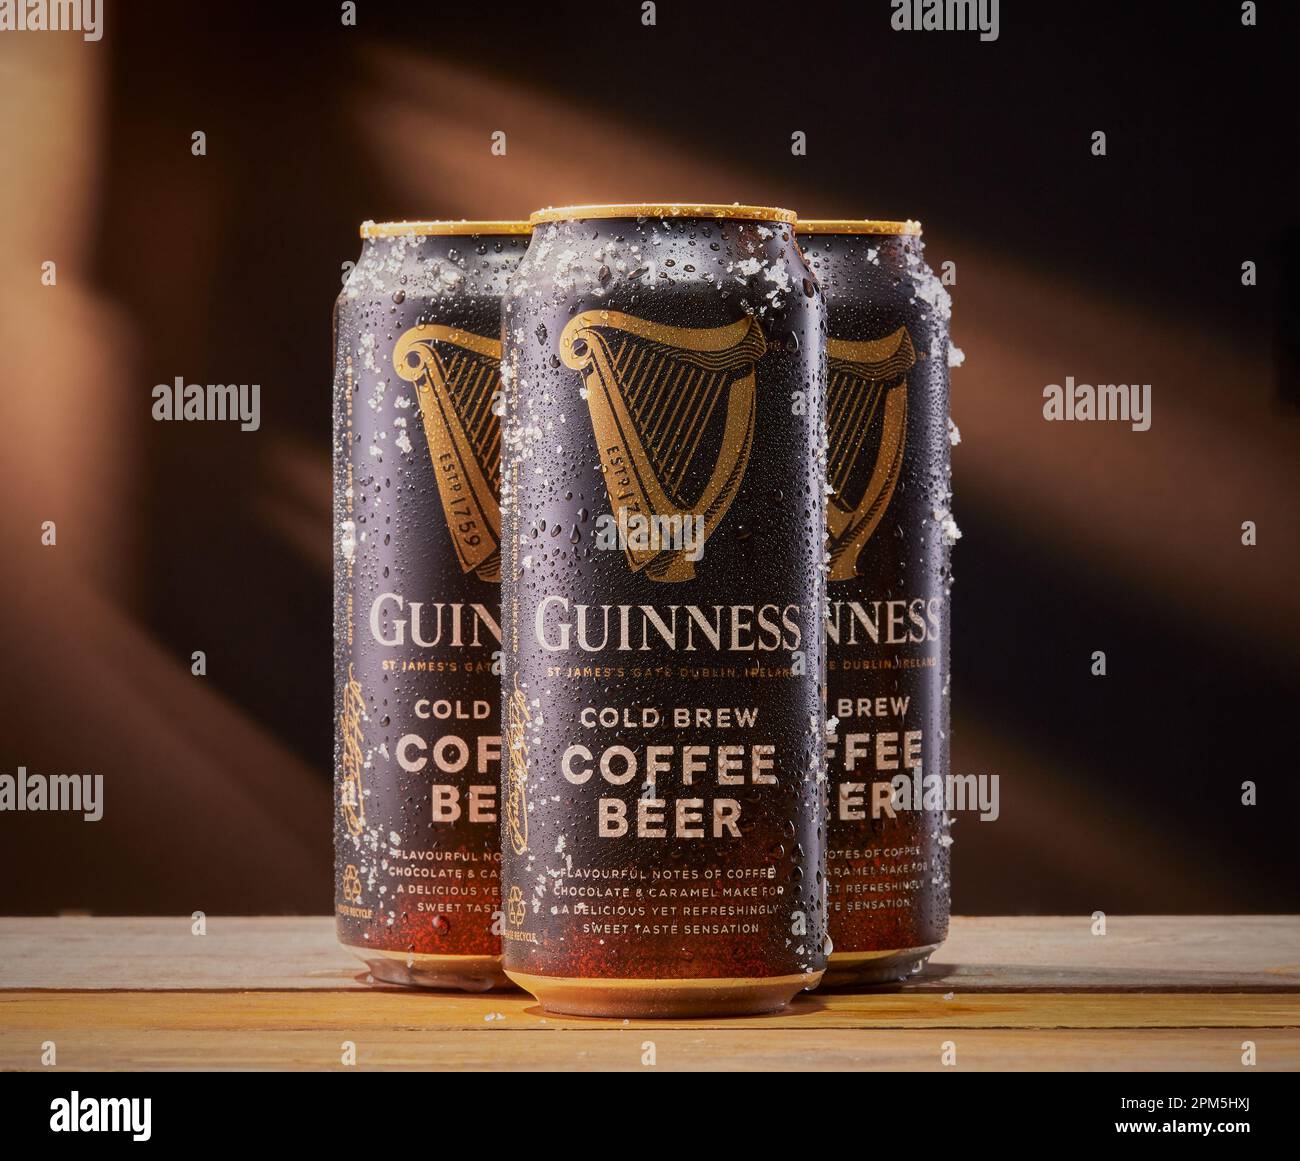 https://c8.alamy.com/comp/2PM5HXJ/mansfieldnottinghamunited-kingdom2023studio-product-image-of-cans-of-guinness-coffee-beerguinness-is-owned-by-diageo-2PM5HXJ.jpg